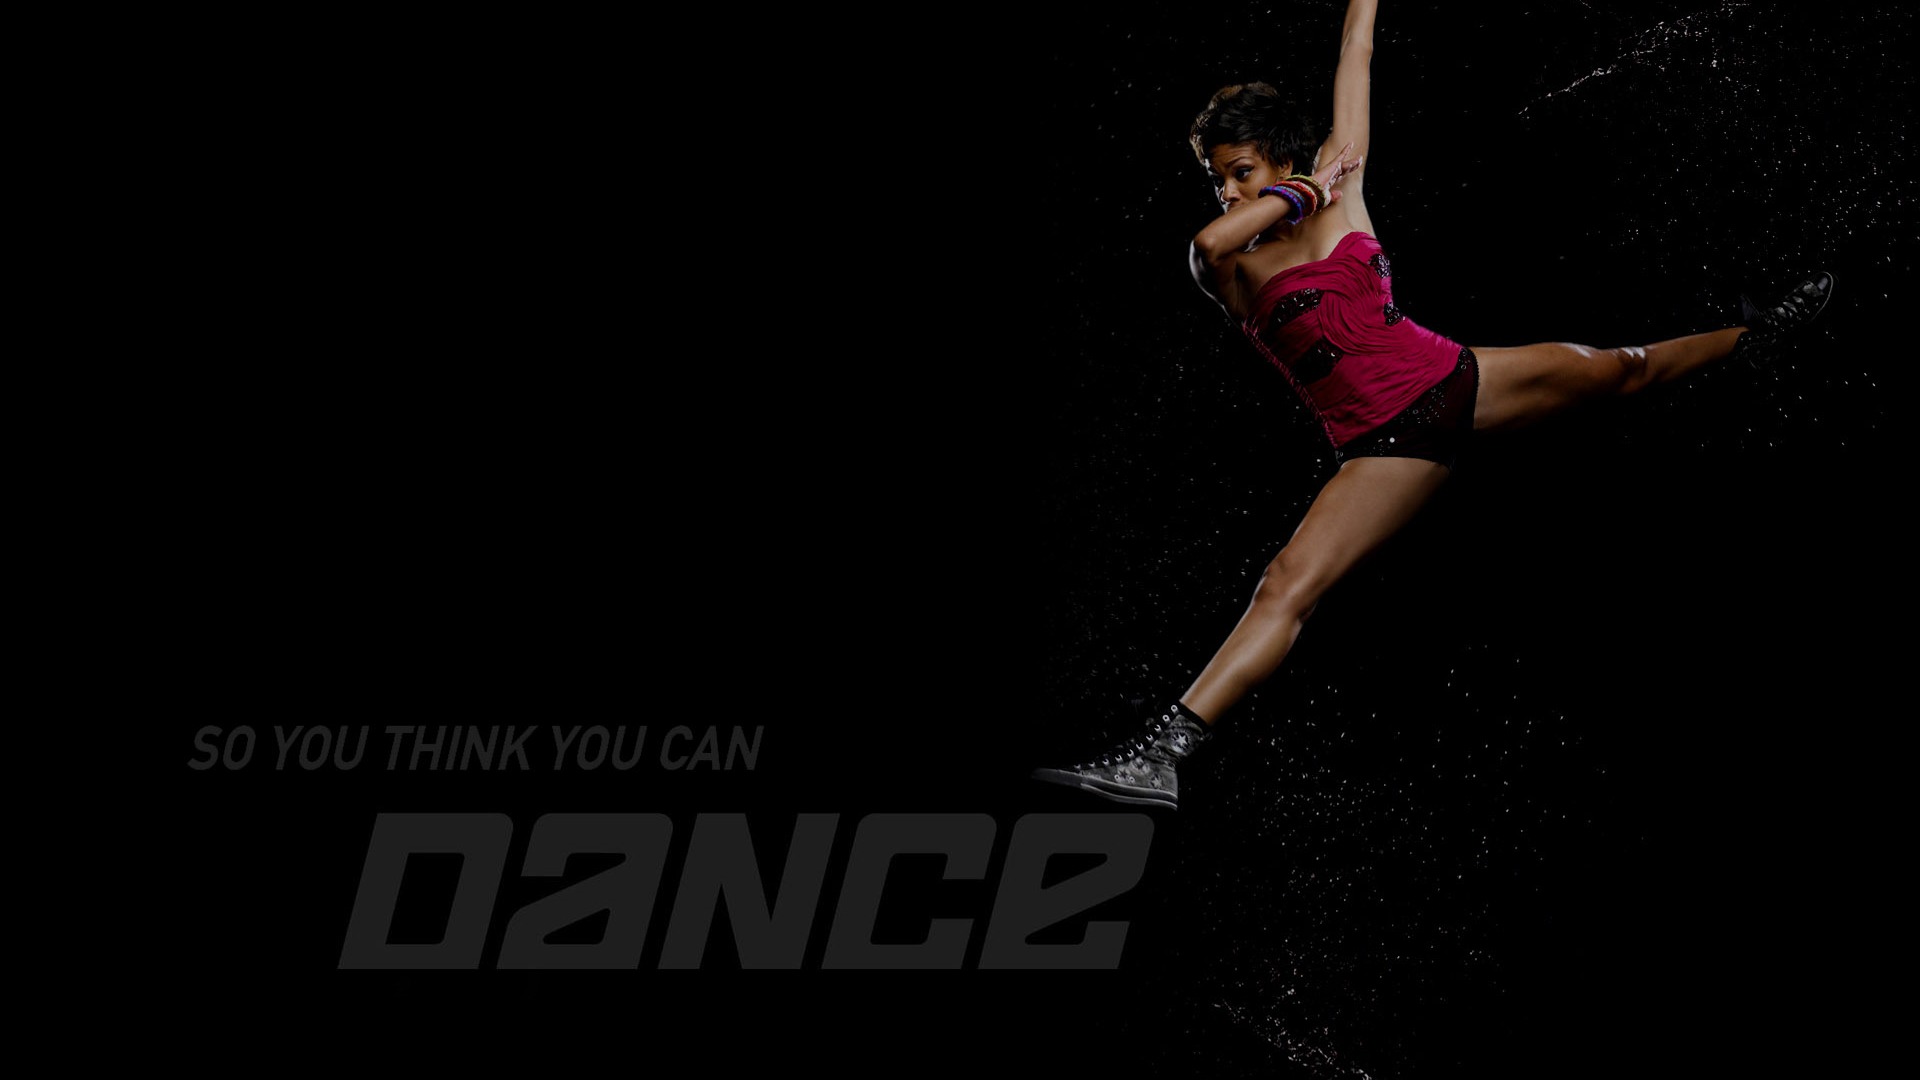 So You Think You Can Dance wallpaper (2) #15 - 1920x1080